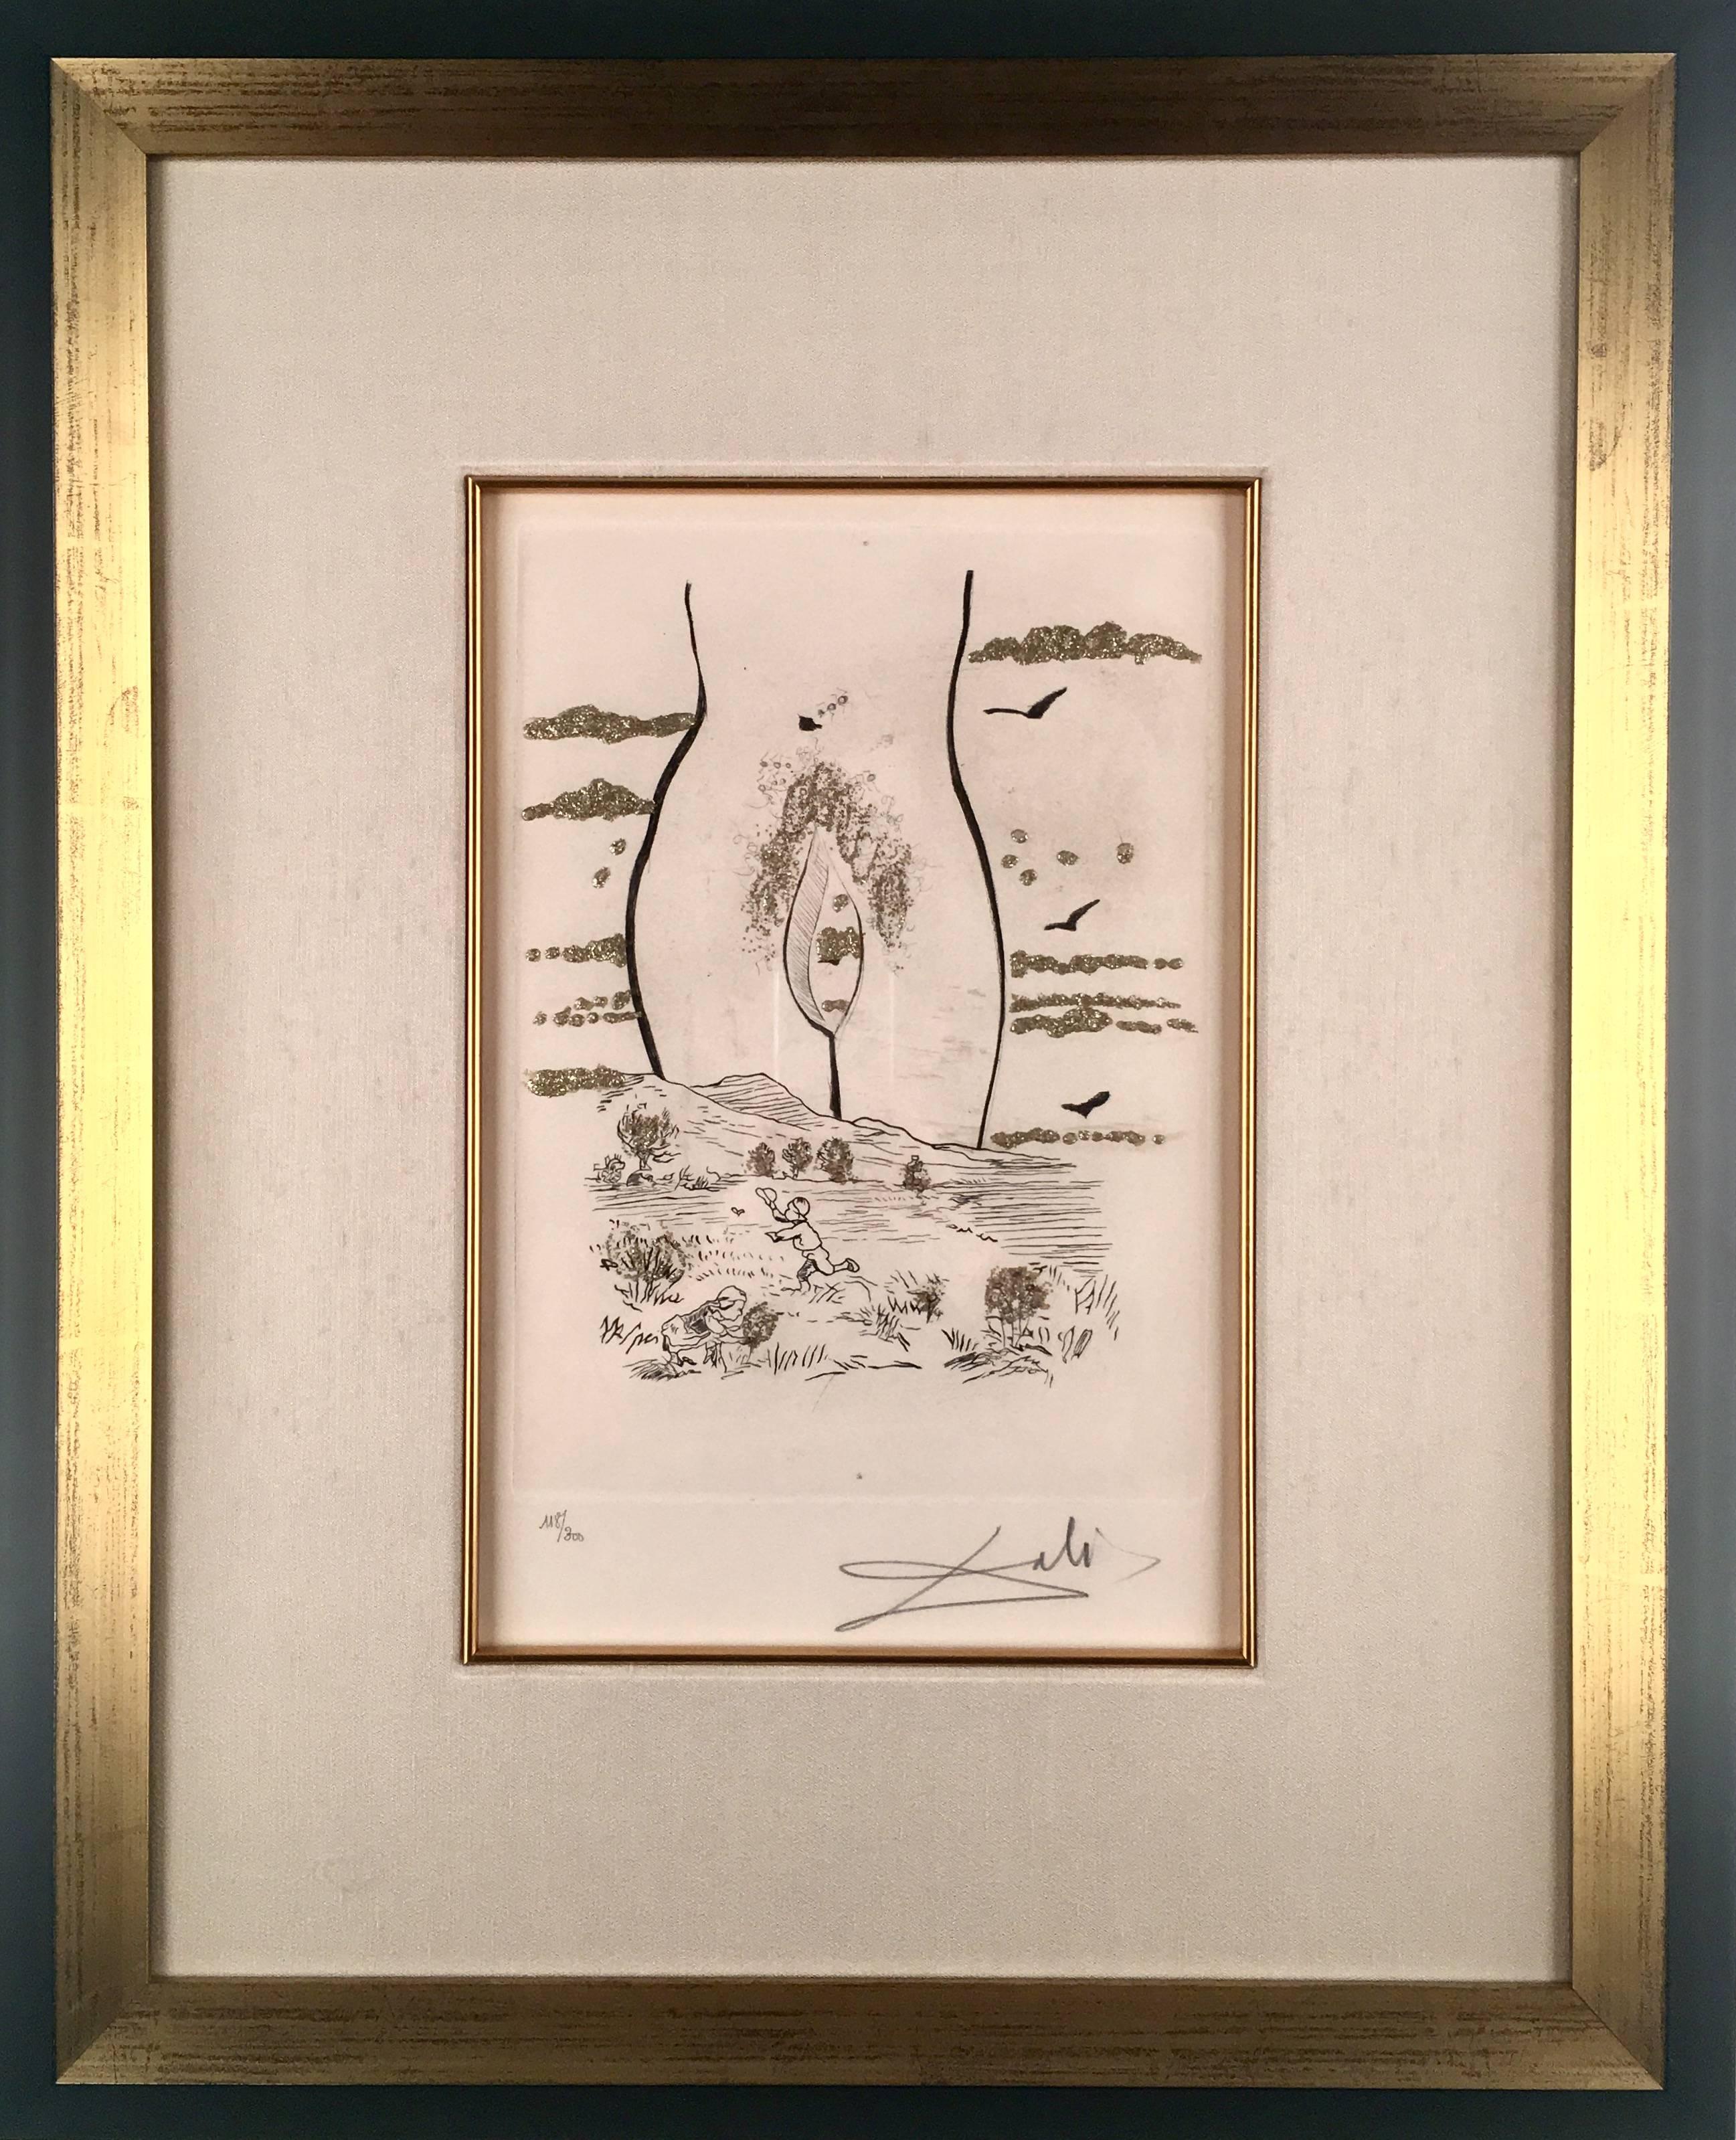 Salvador Dali, A l'eternelle Madame from Les Amours Jaunes, etching, 1974 - Print by Salvador Dalí